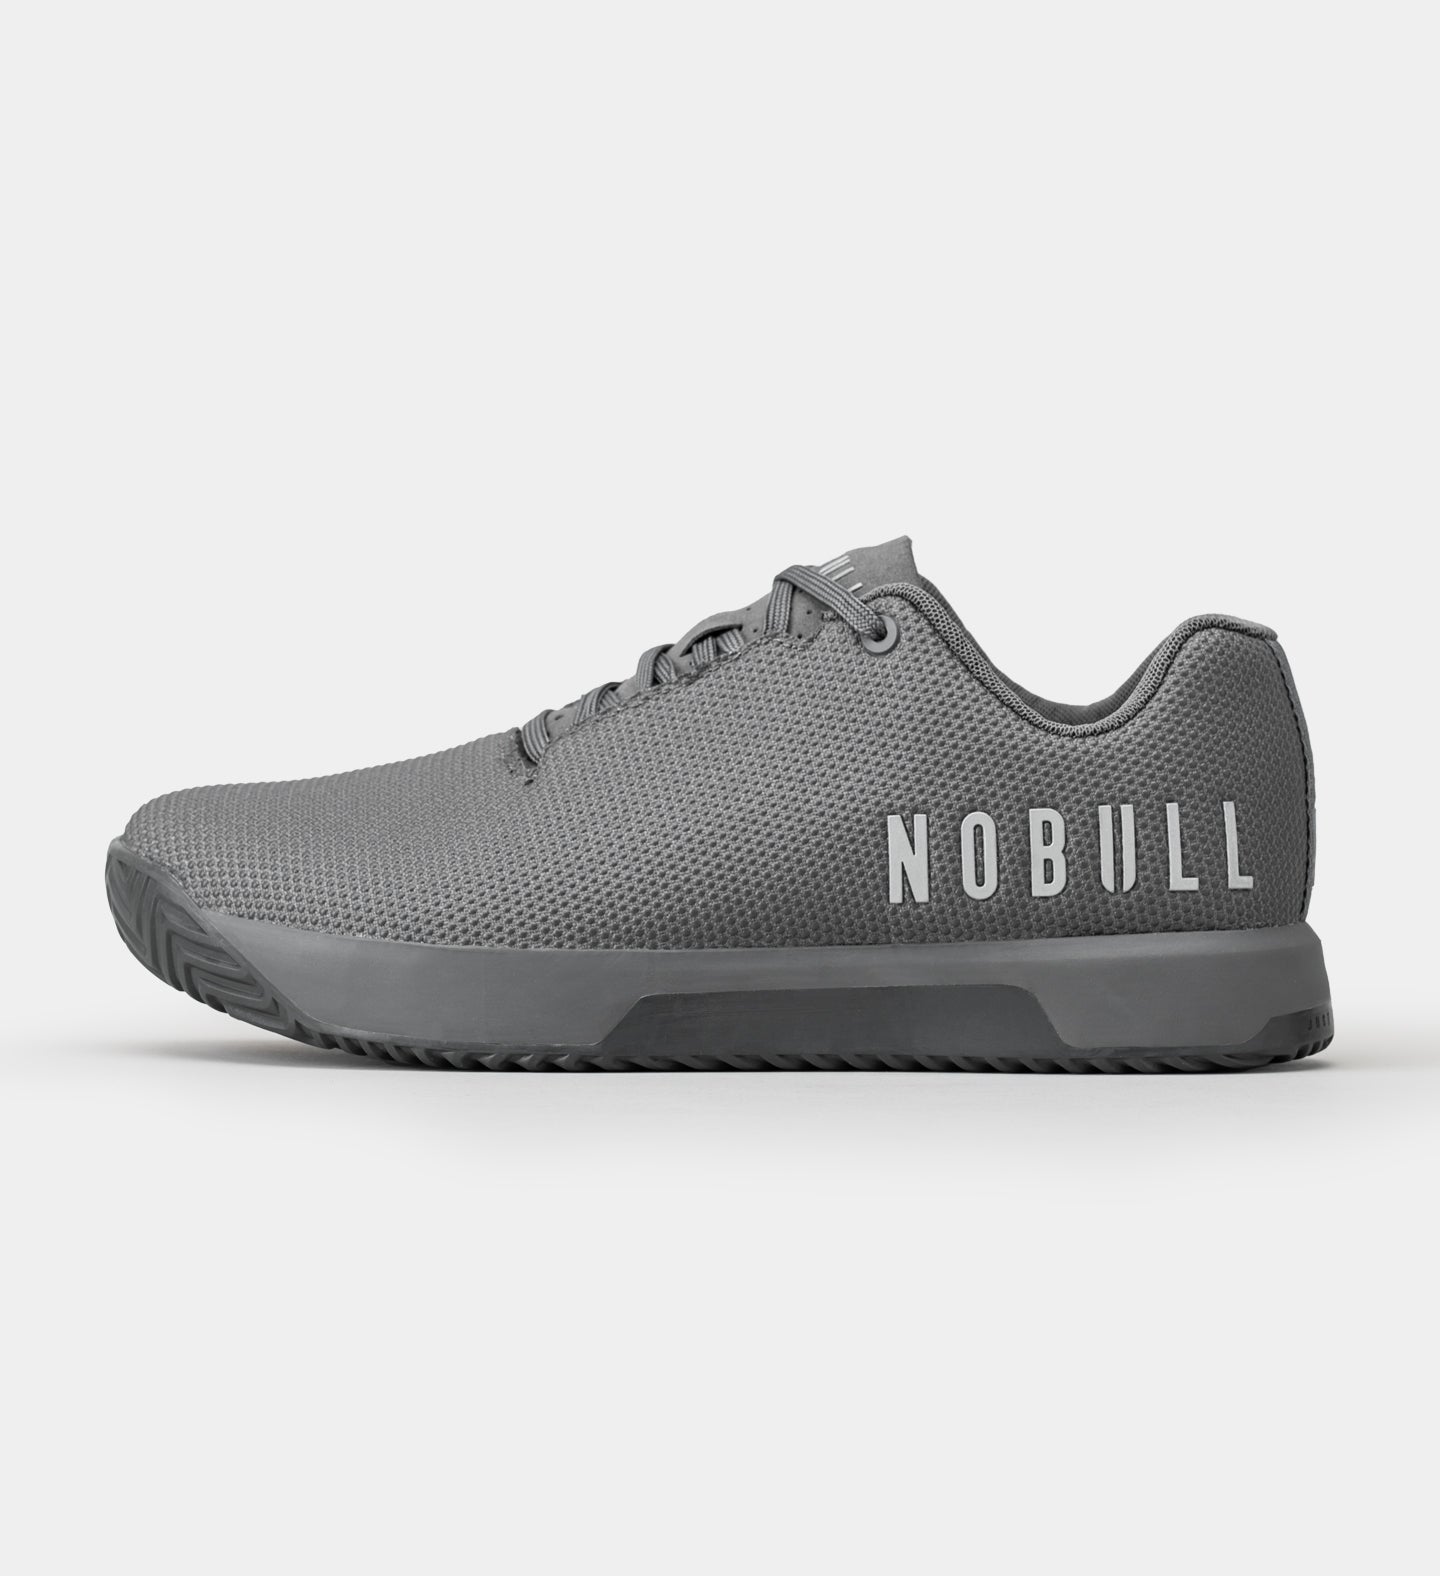 NOBULL Training Shoes, Apparel, and Accessories.